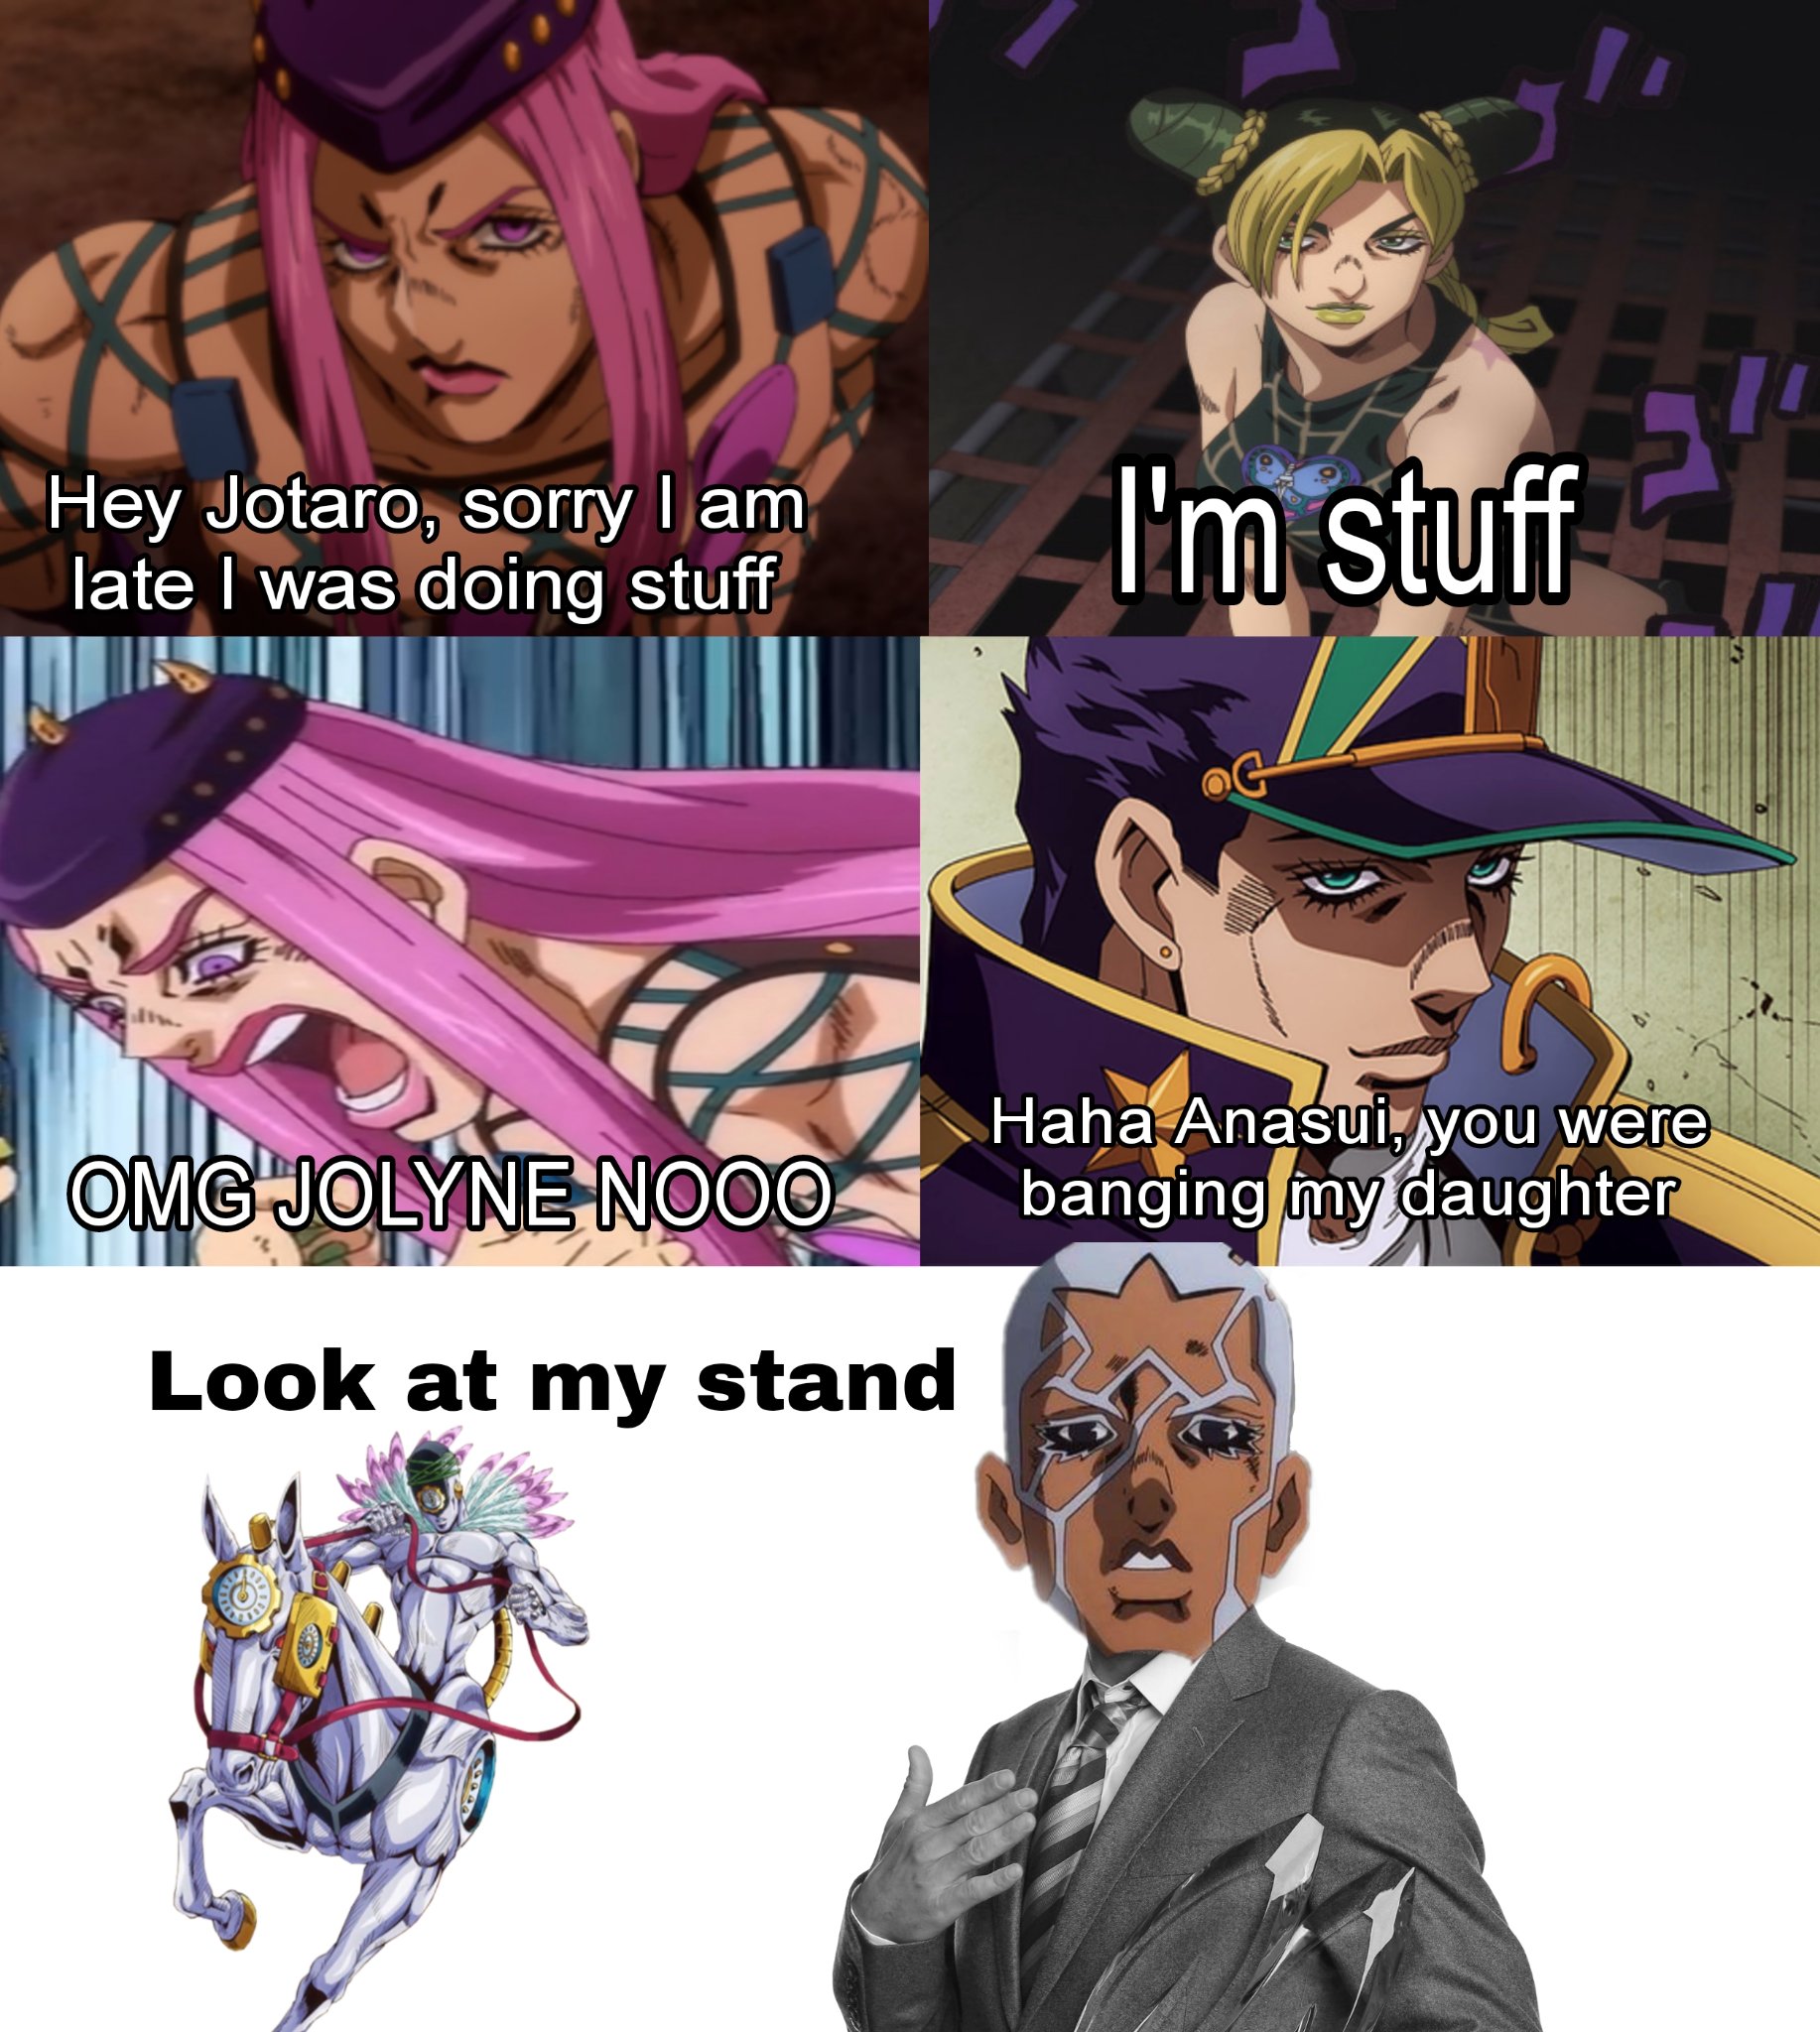 JoJo fans making the worst memes in existence on X: Being unfunny is a JoJo  reference  / X